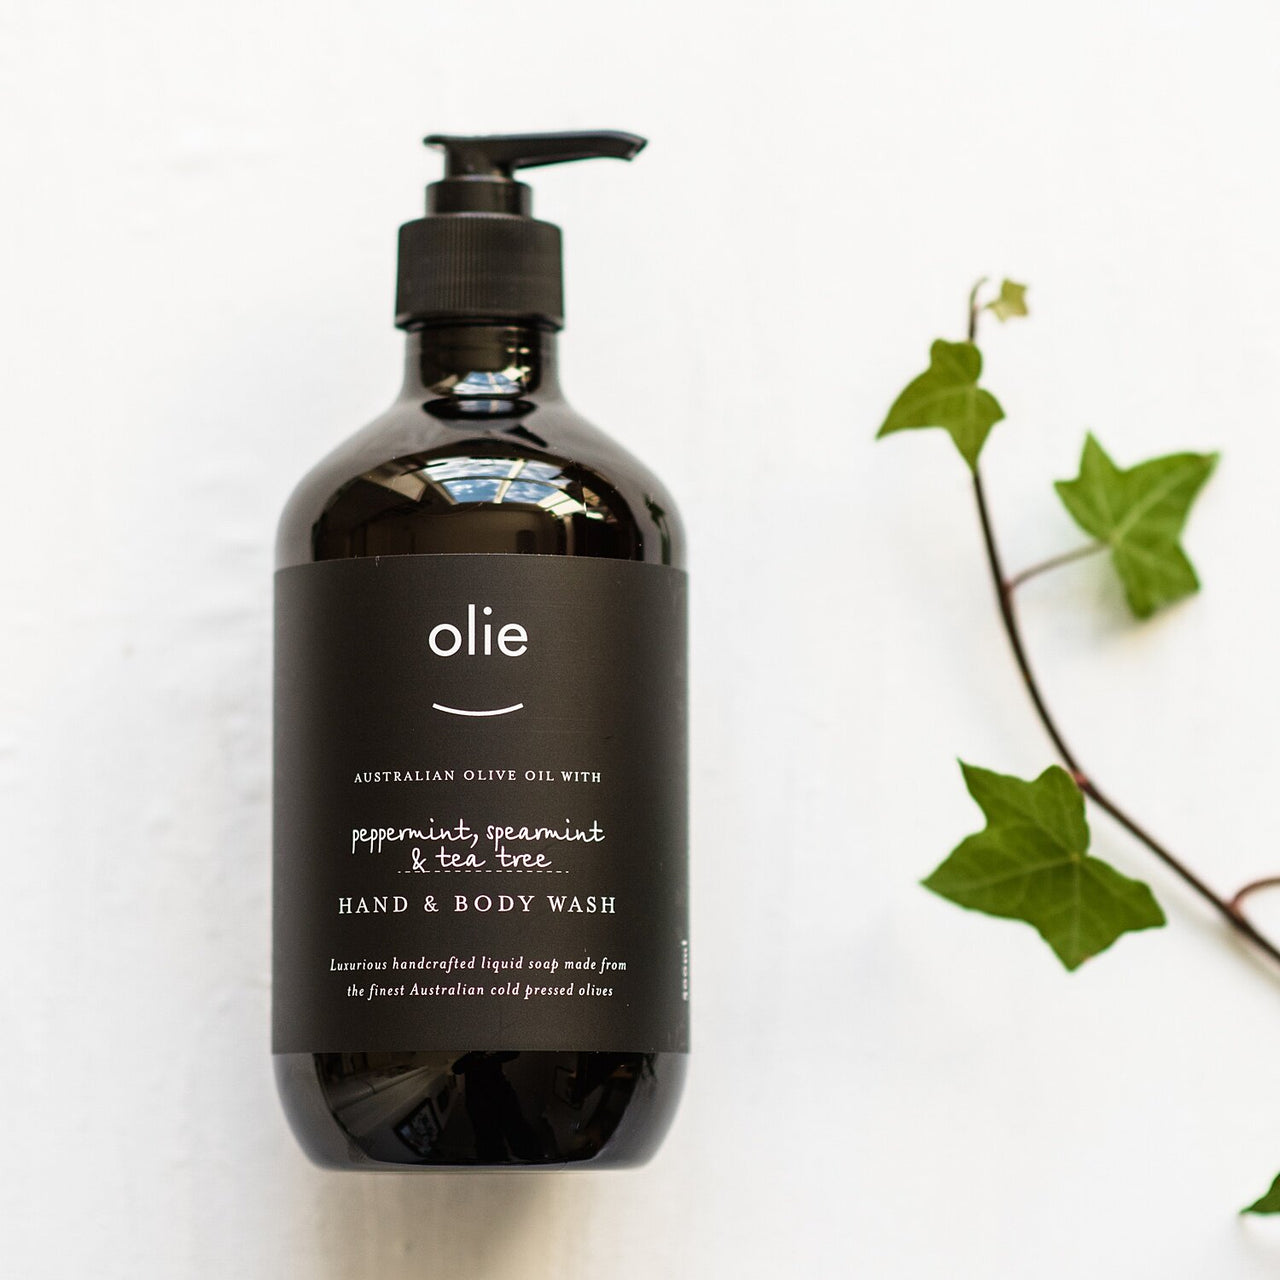 Peppermint, Spearmint & Teatree Hand and Body Wash by Olieve and Olie. Australian Art Prints and Homewares. Green Door Decor. www.greendoordecor.com.au